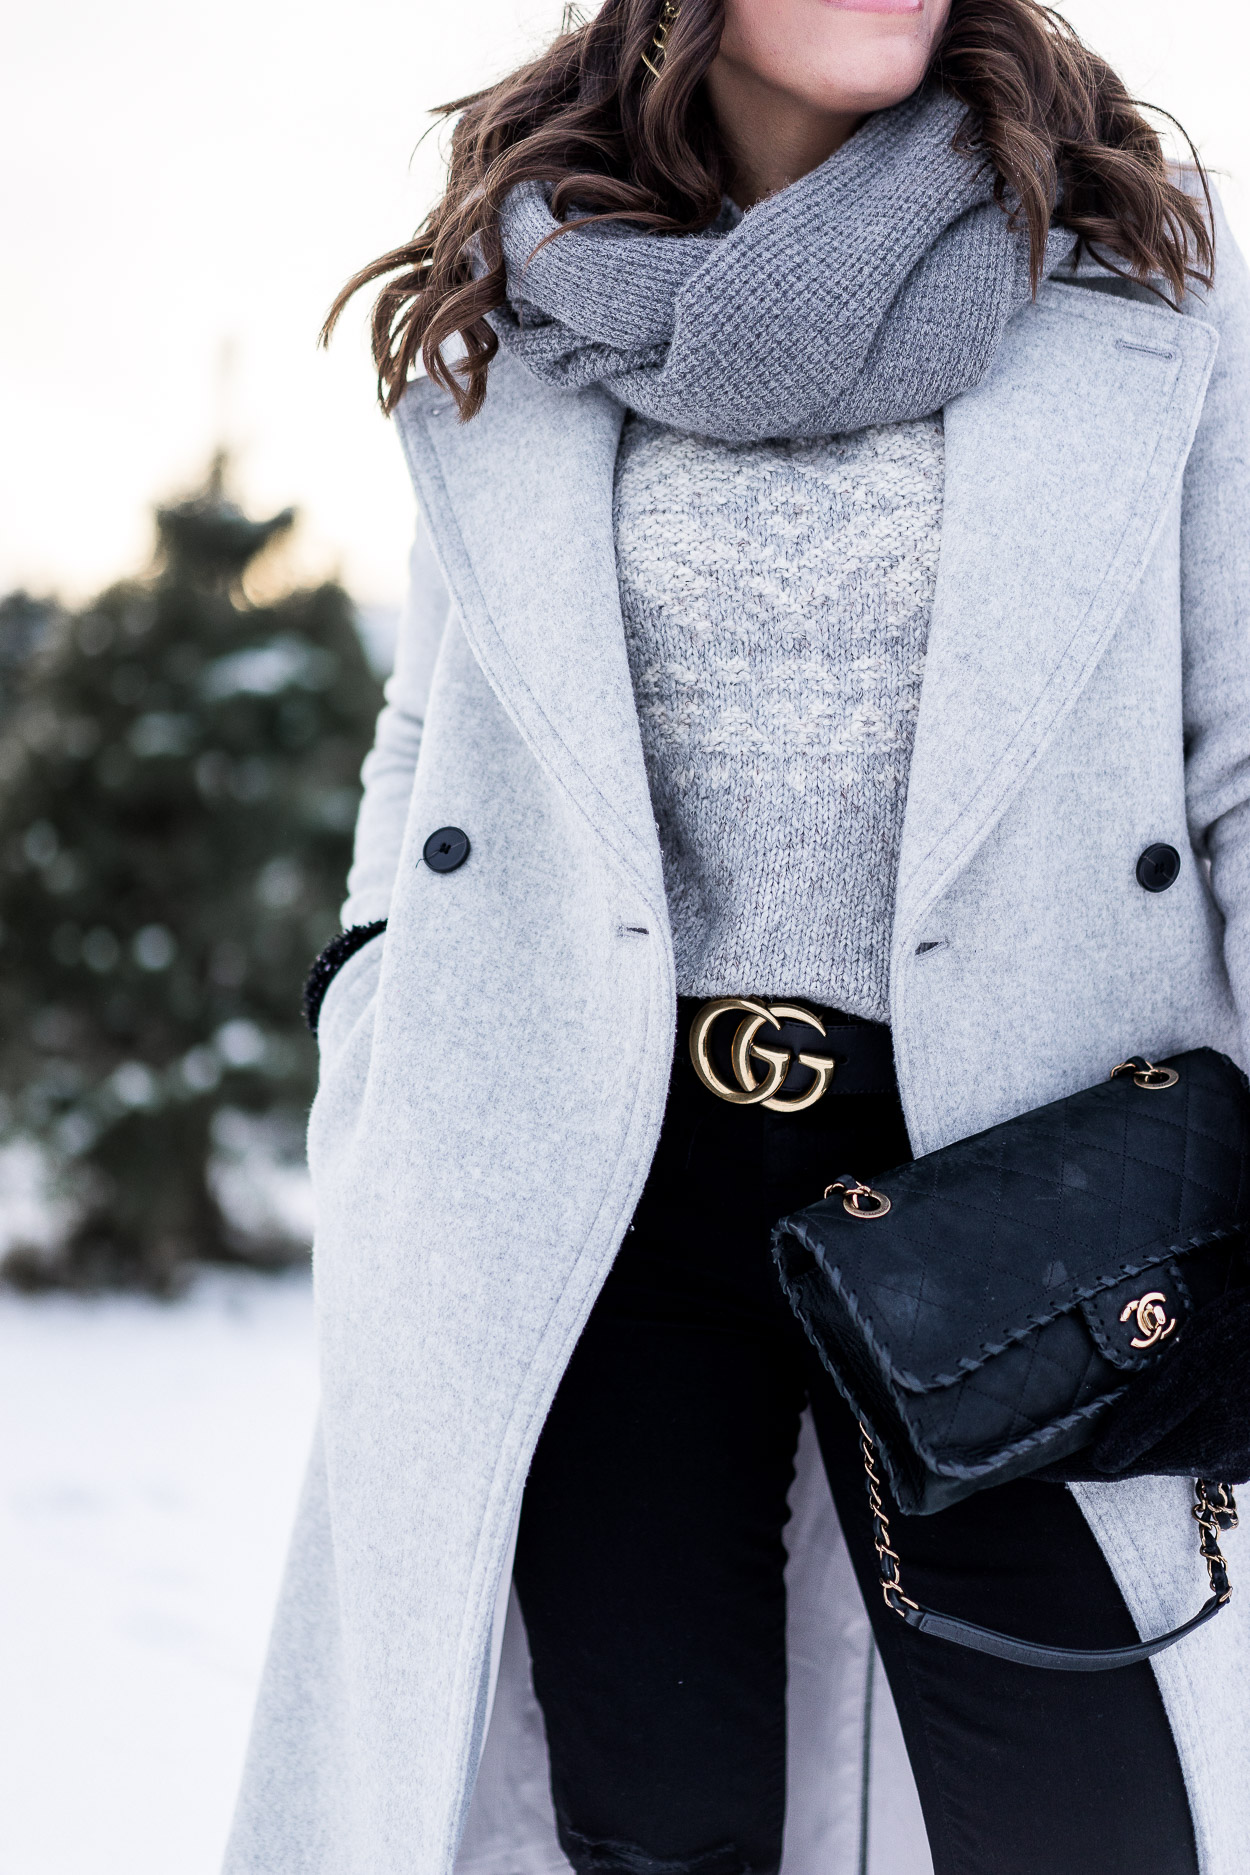 grey and black winter outfit